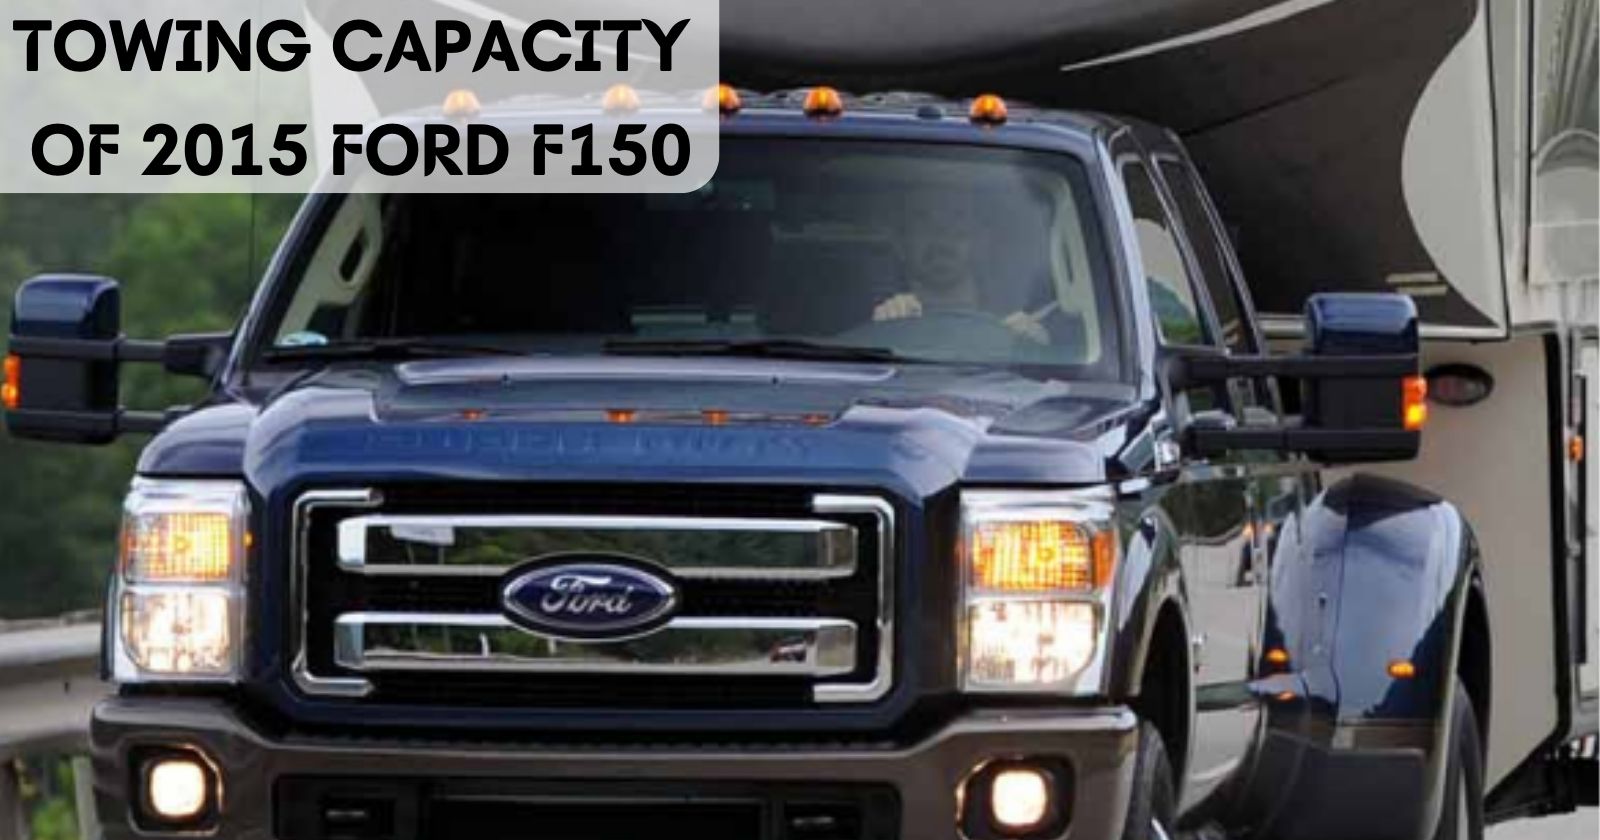 2015 Ford F150 Towing Capacity with Towing Chart The Car Towing